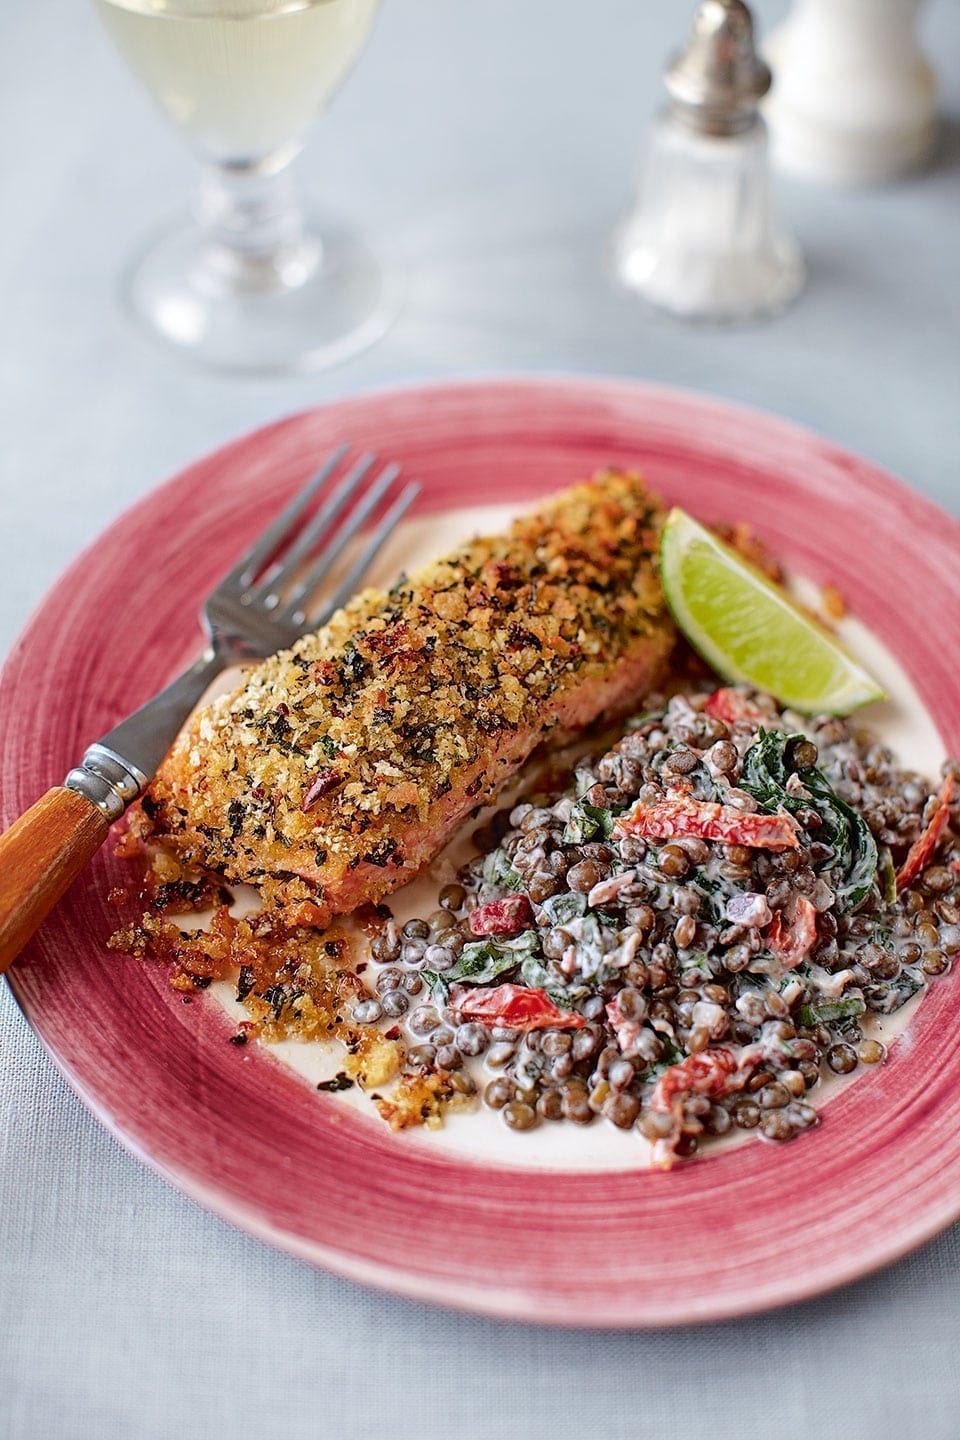 Lime crusted salmon with creamy, herby lentils recipe | delicious. magazine